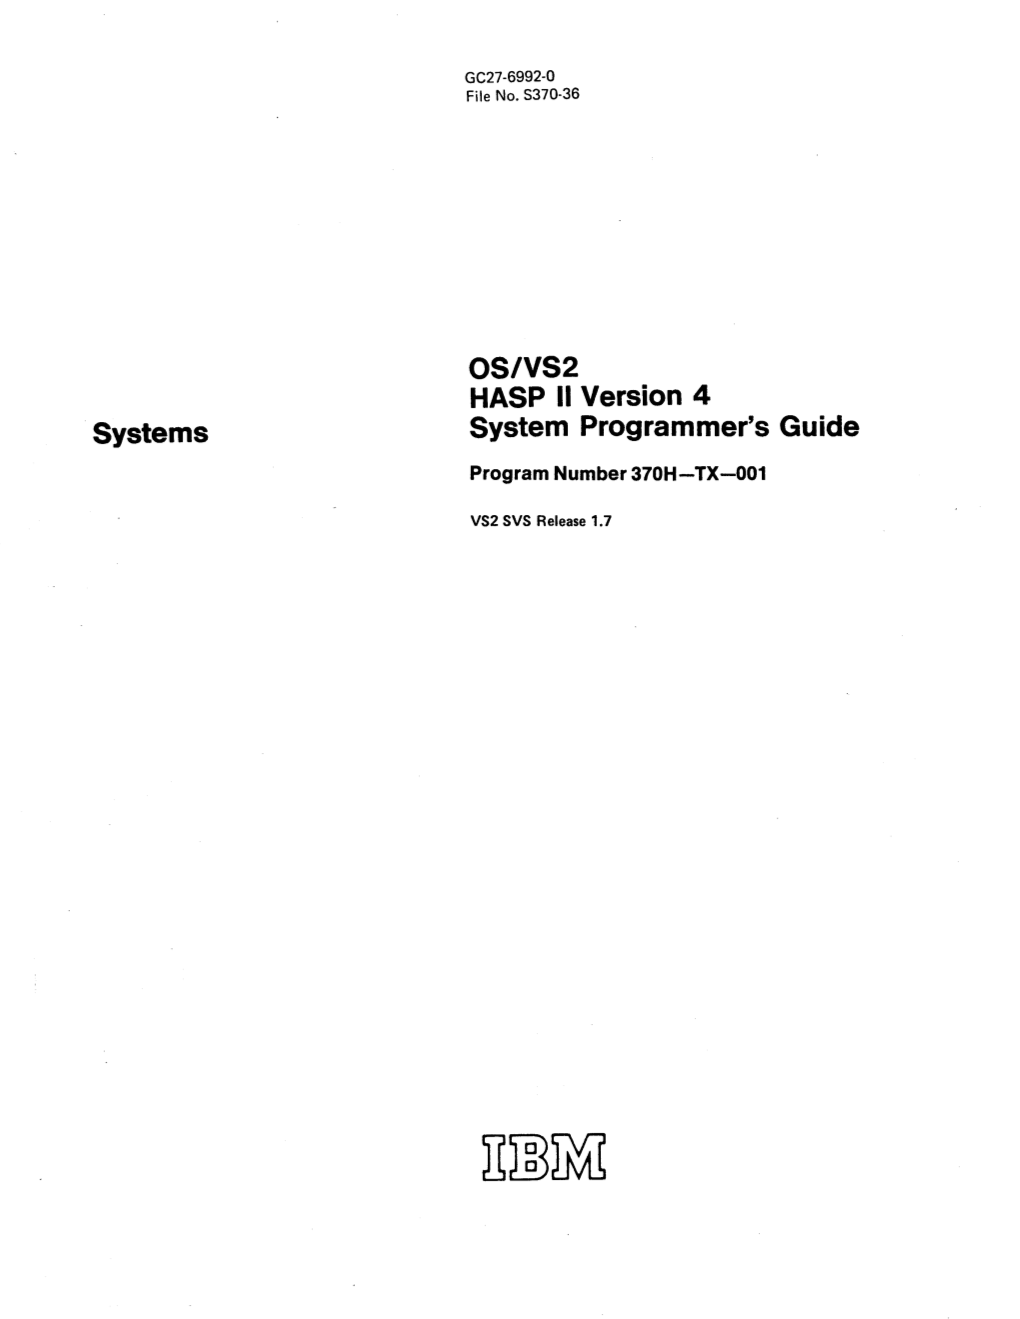 OS/VS2 HASP II Version 4 System Programmer's Guide